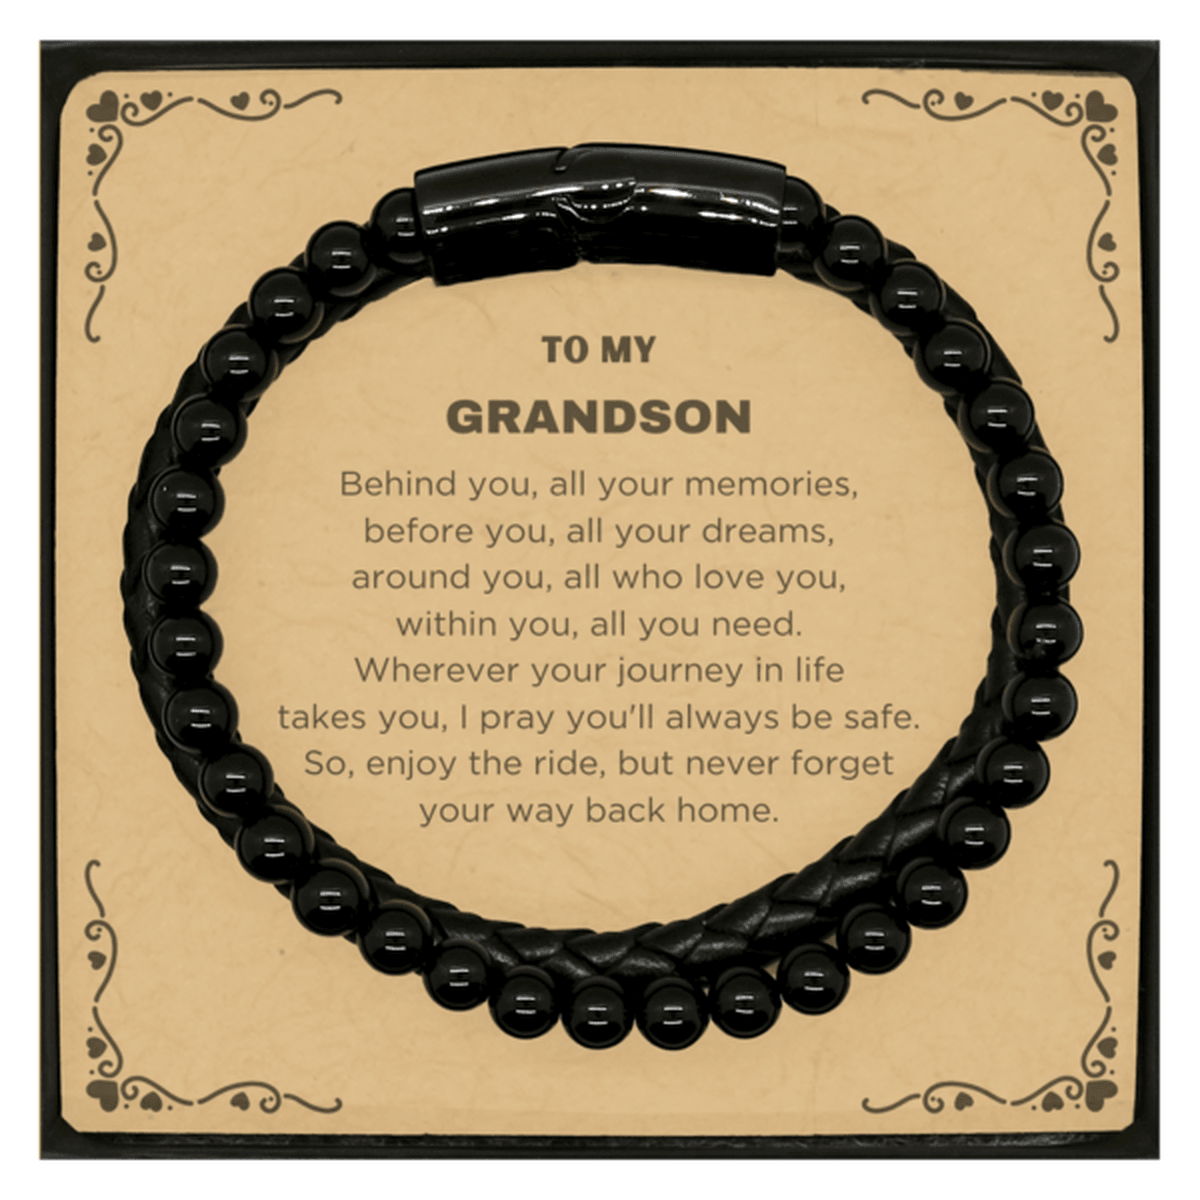 Inspirational Grandson Braided Stone Leather Bracelet - Behind you, all your Memories, Before you, all your Dreams - Birthday, Christmas Holiday Gifts - Mallard Moon Gift Shop